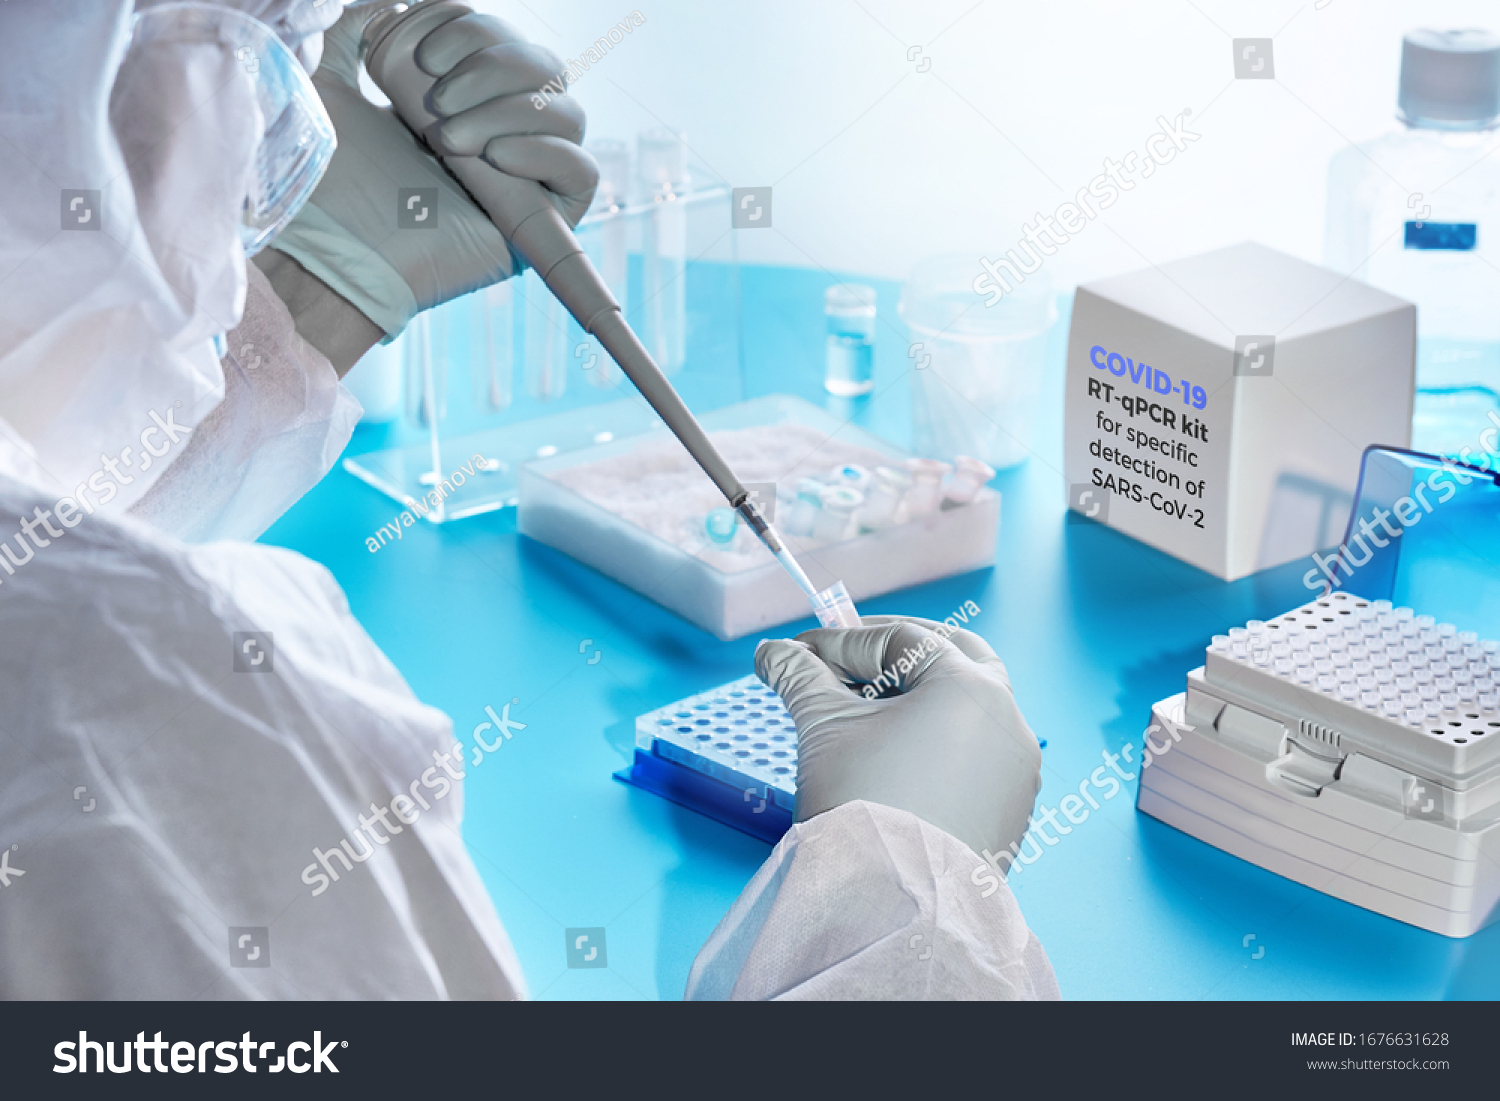 SARS-COV-2 pcr diagnostics kit. Epidemiologist in protective suit, mask and glasses performs pcr tests to detect specific region of SARS-nCoV-2 virus, cause of Covid-19 viral pneumonia.